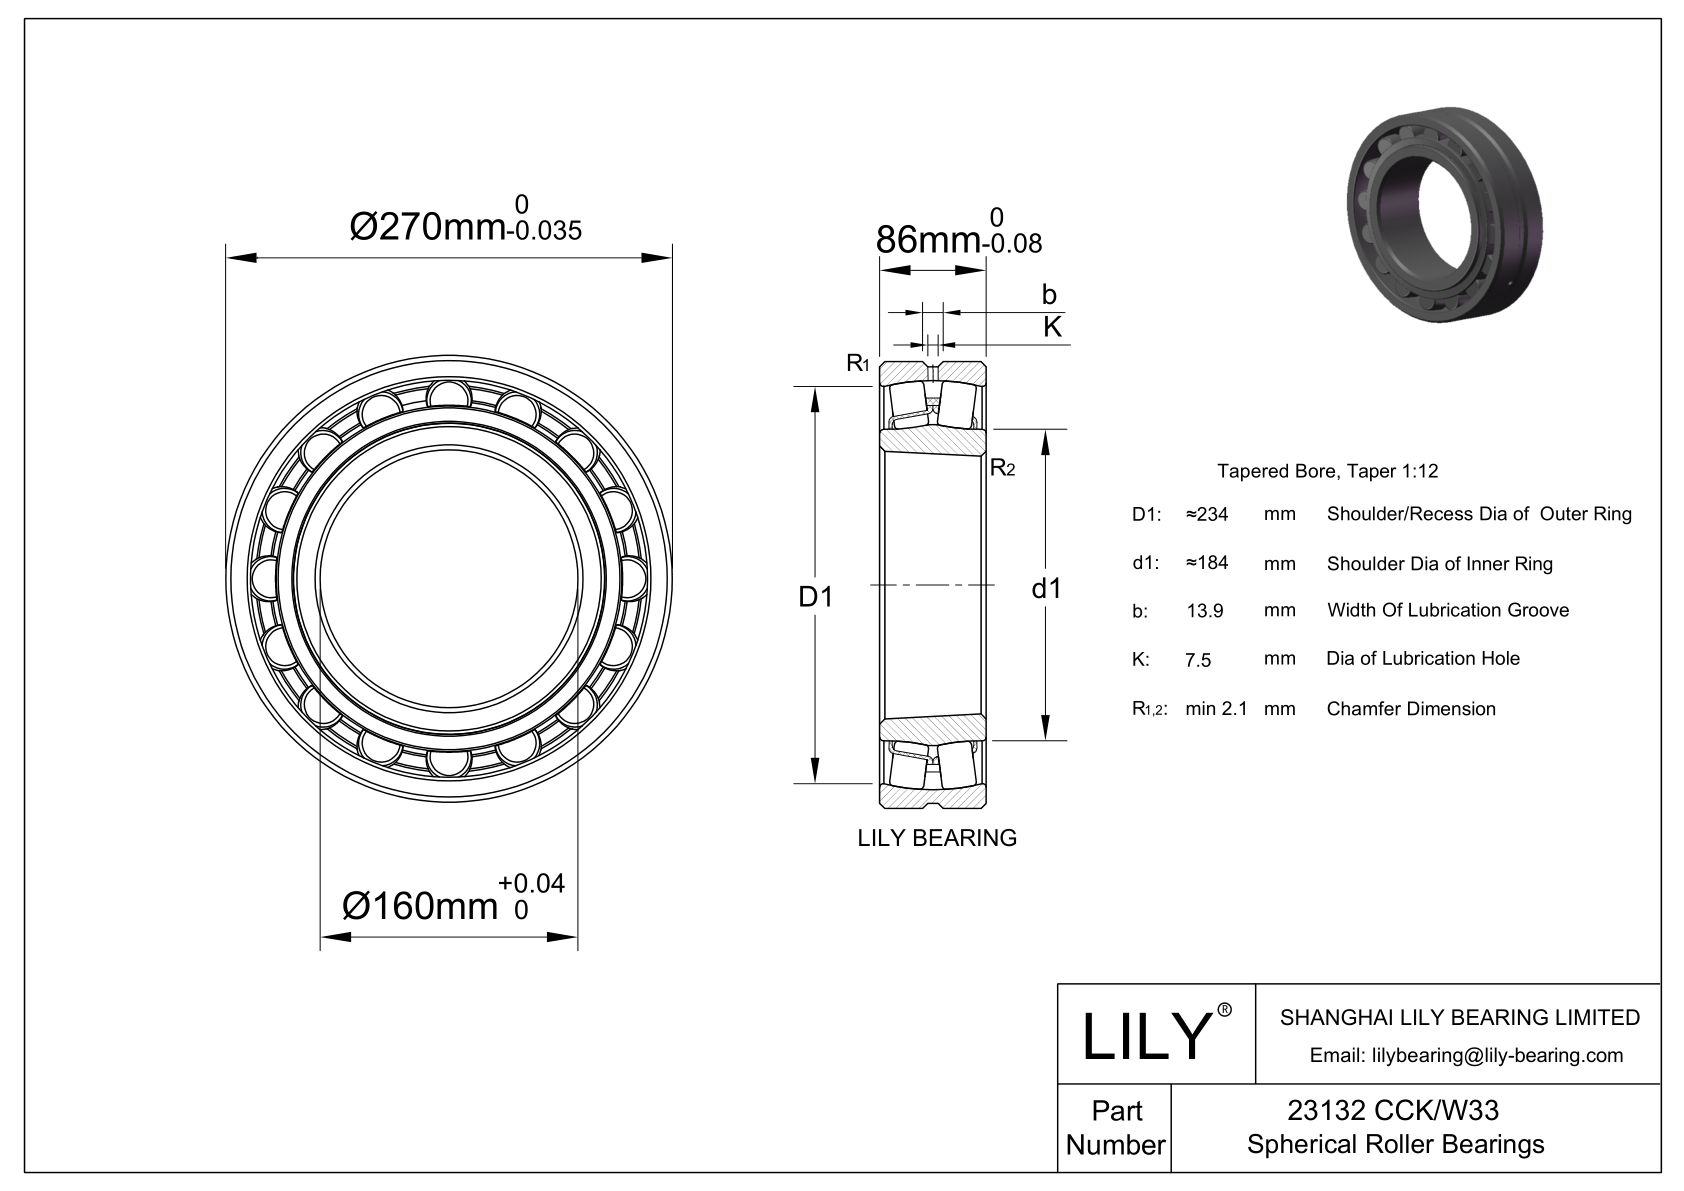 23132 CCK/W33 Double Row Spherical Roller Bearing cad drawing